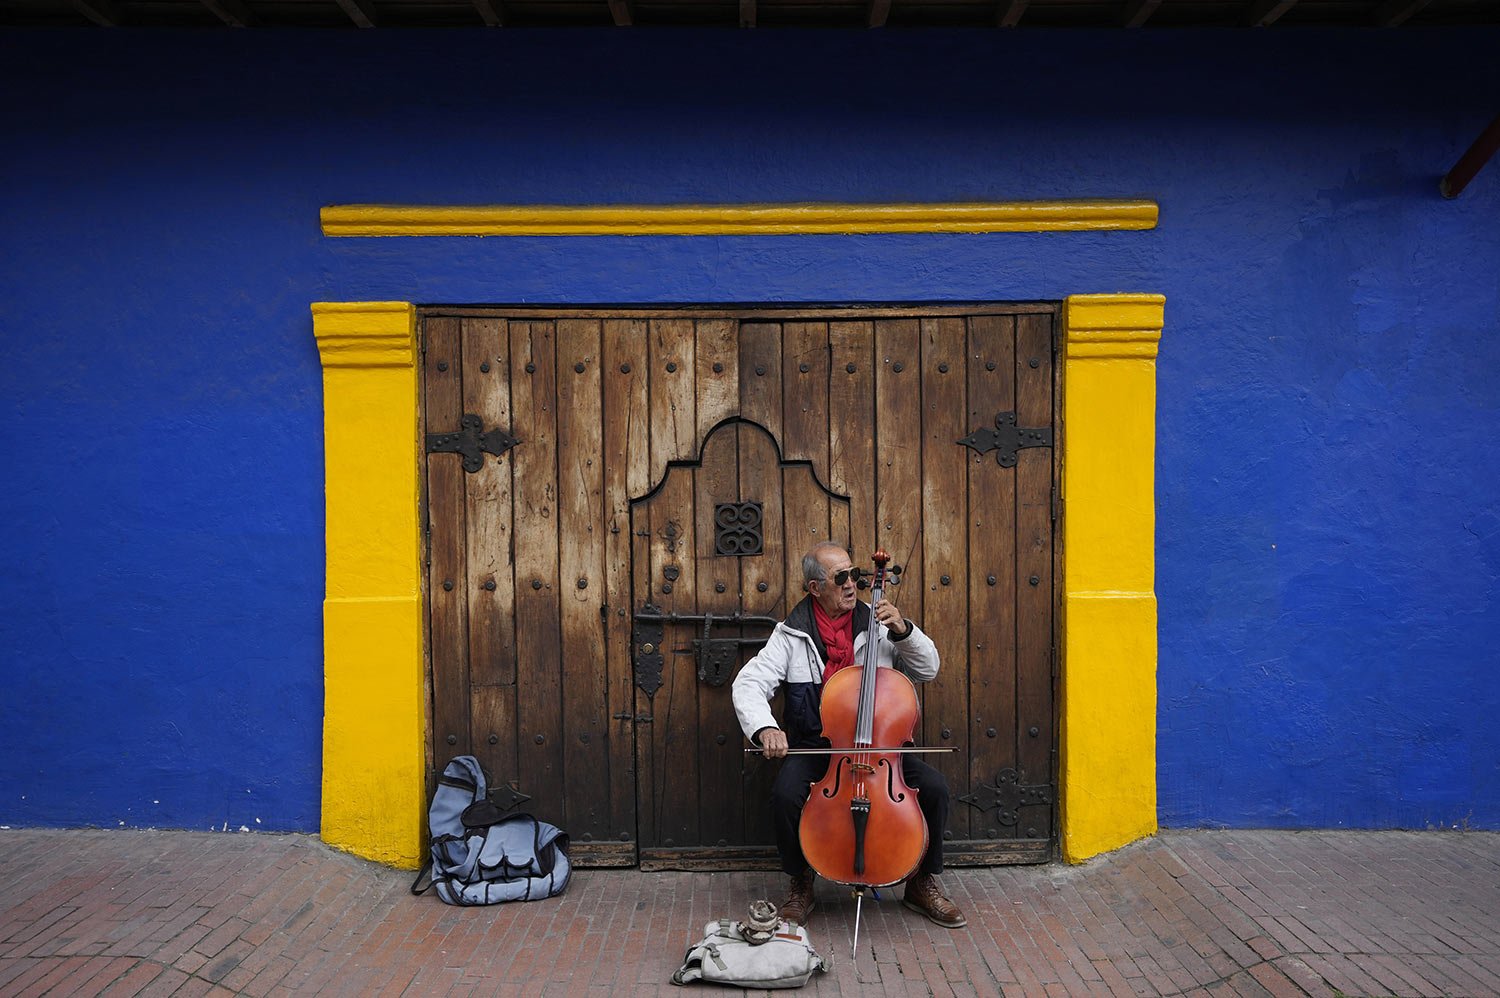  Fabio Guarin, 76, plays a cello for tips which he said he uses to buy his meals in the La Candelaria neighborhood of Bogota, Colombia, Thursday, Aug. 4, 2022. (AP Photo/Fernando Vergara) 